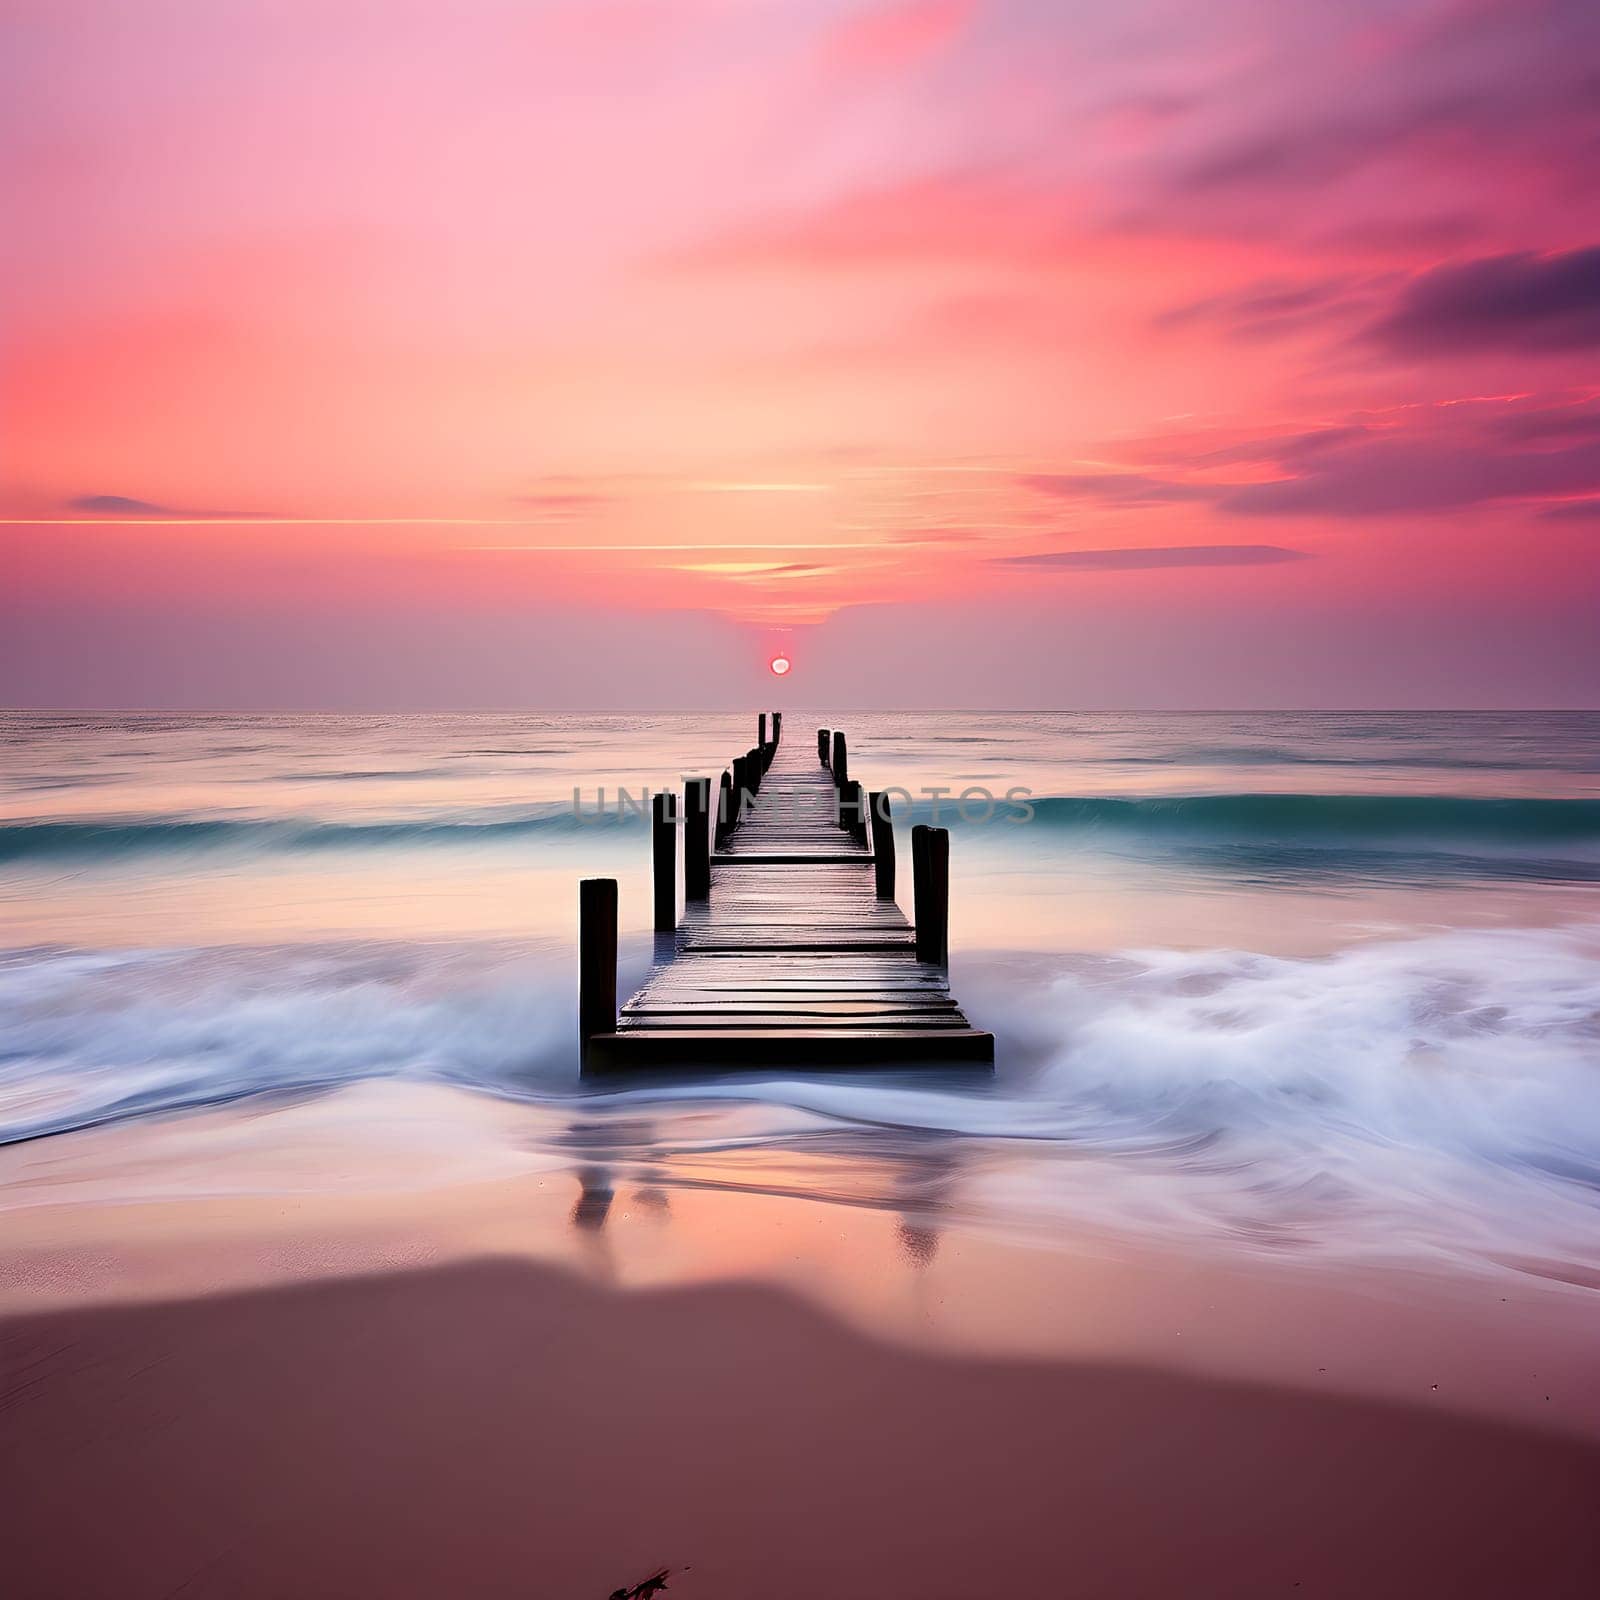 Tranquil Jetty Overlooking the Ocean at Sunrise